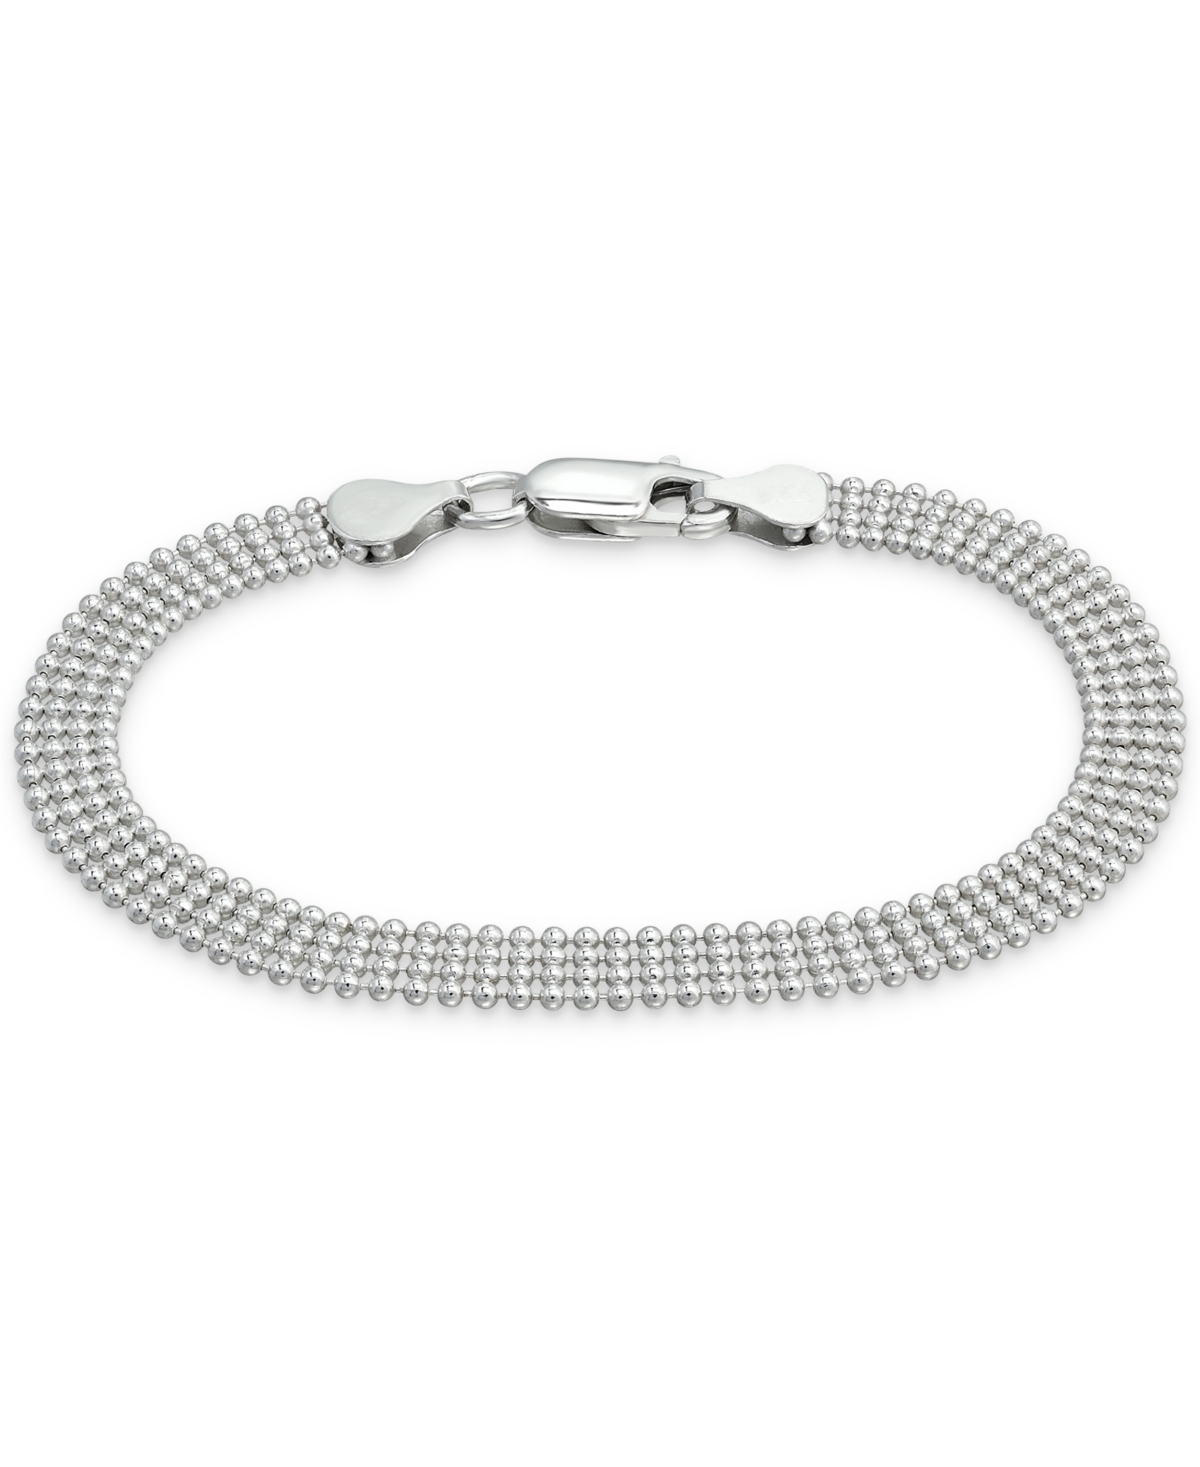 Sterling Silver Bracelet Four Row Bead Chain - Silver